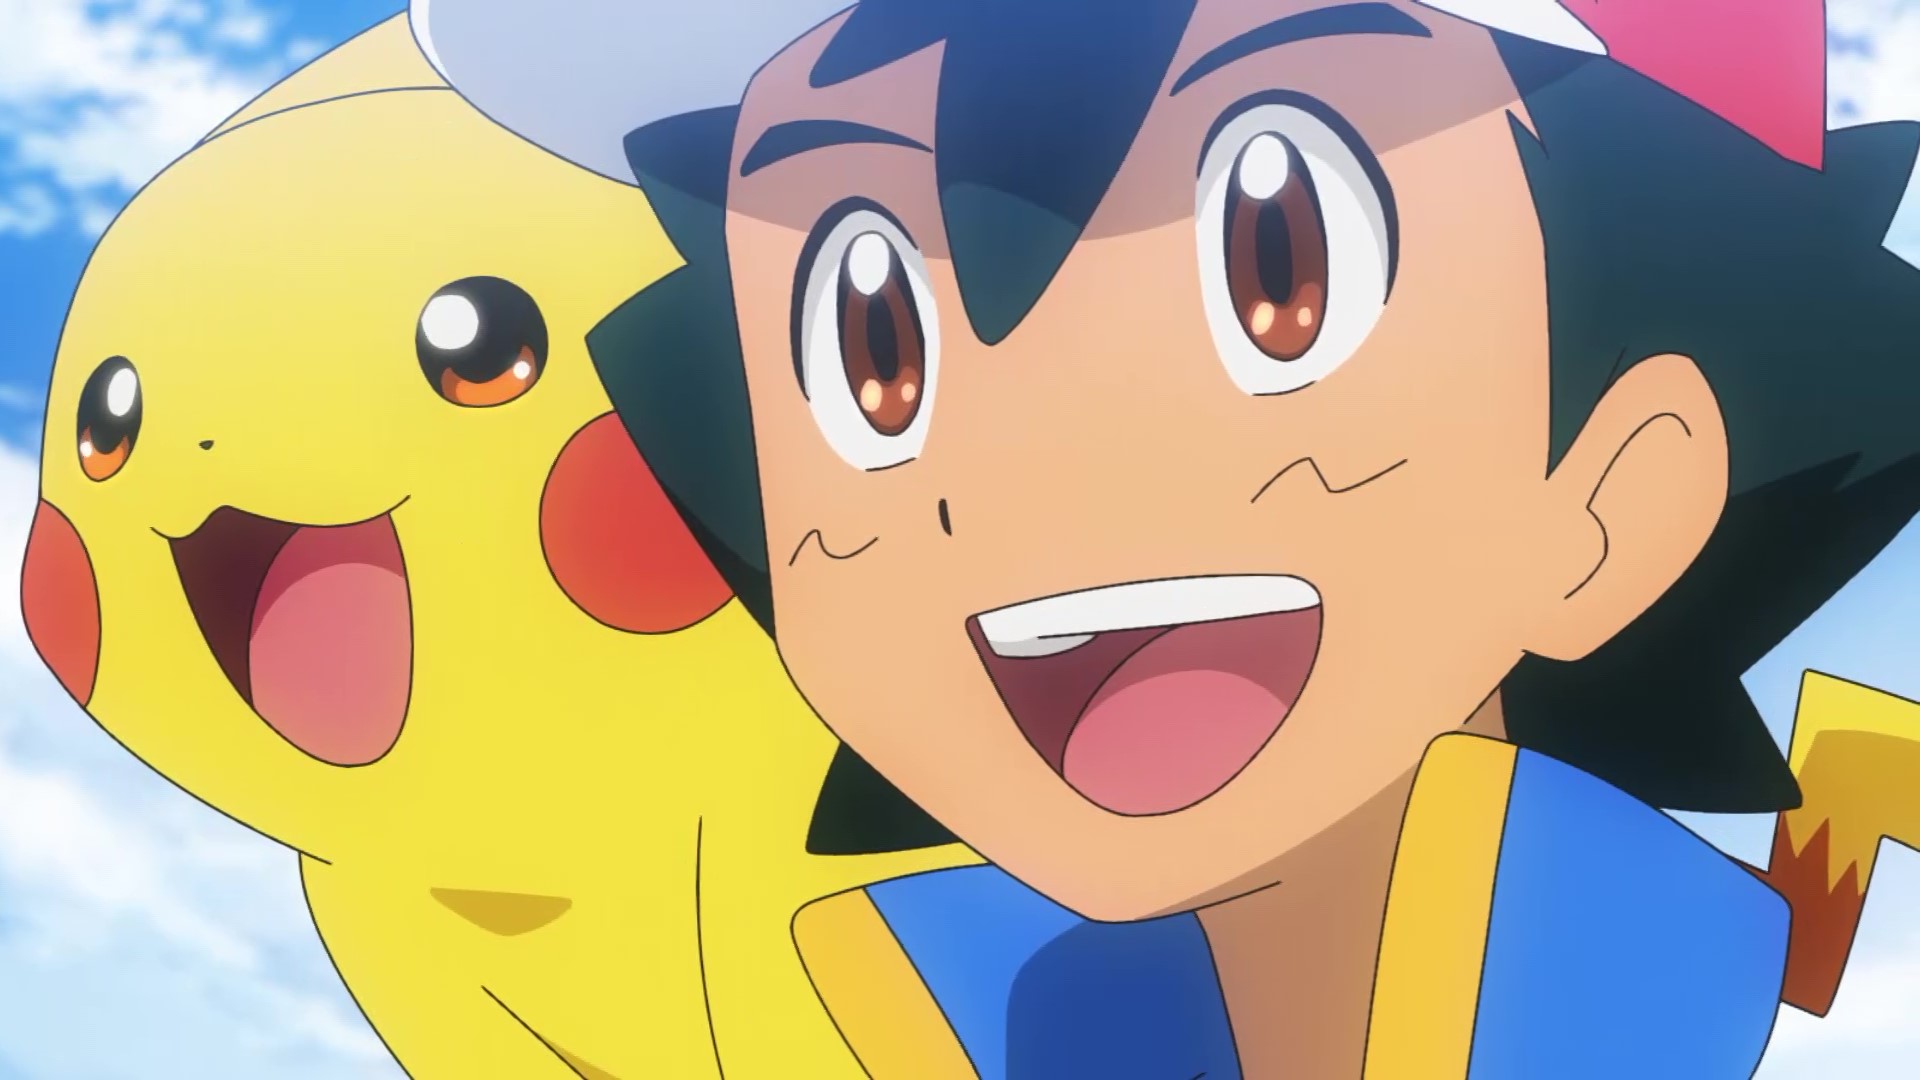 Pokémon Horizons: The Series gets a trailer to show off its new